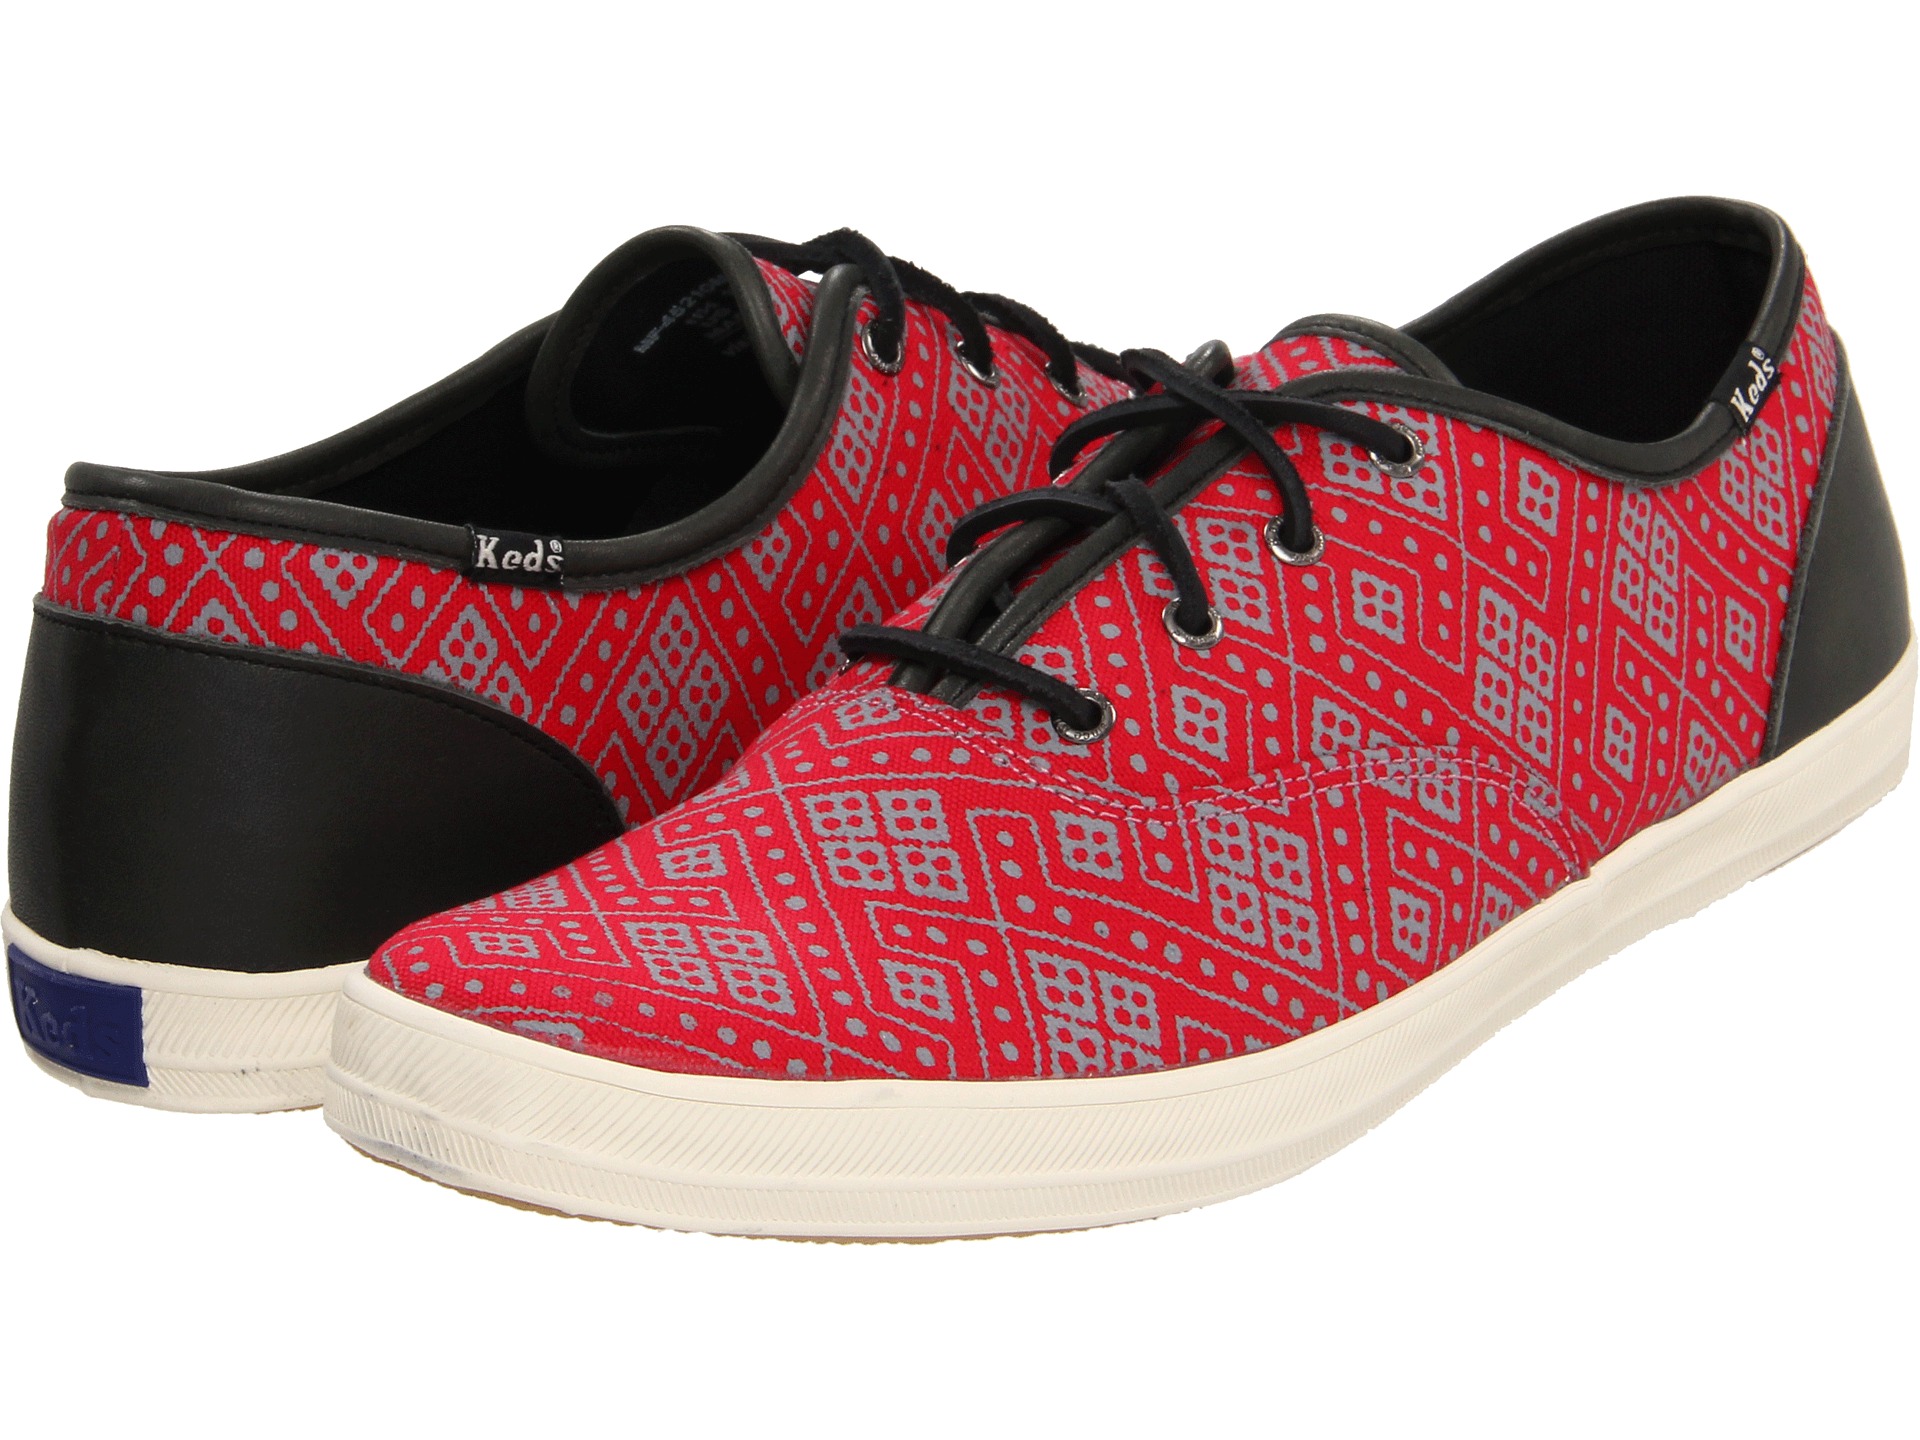 Keds Champion A Line Ankle Wrap $31.99 ( 42% off MSRP $55.00)